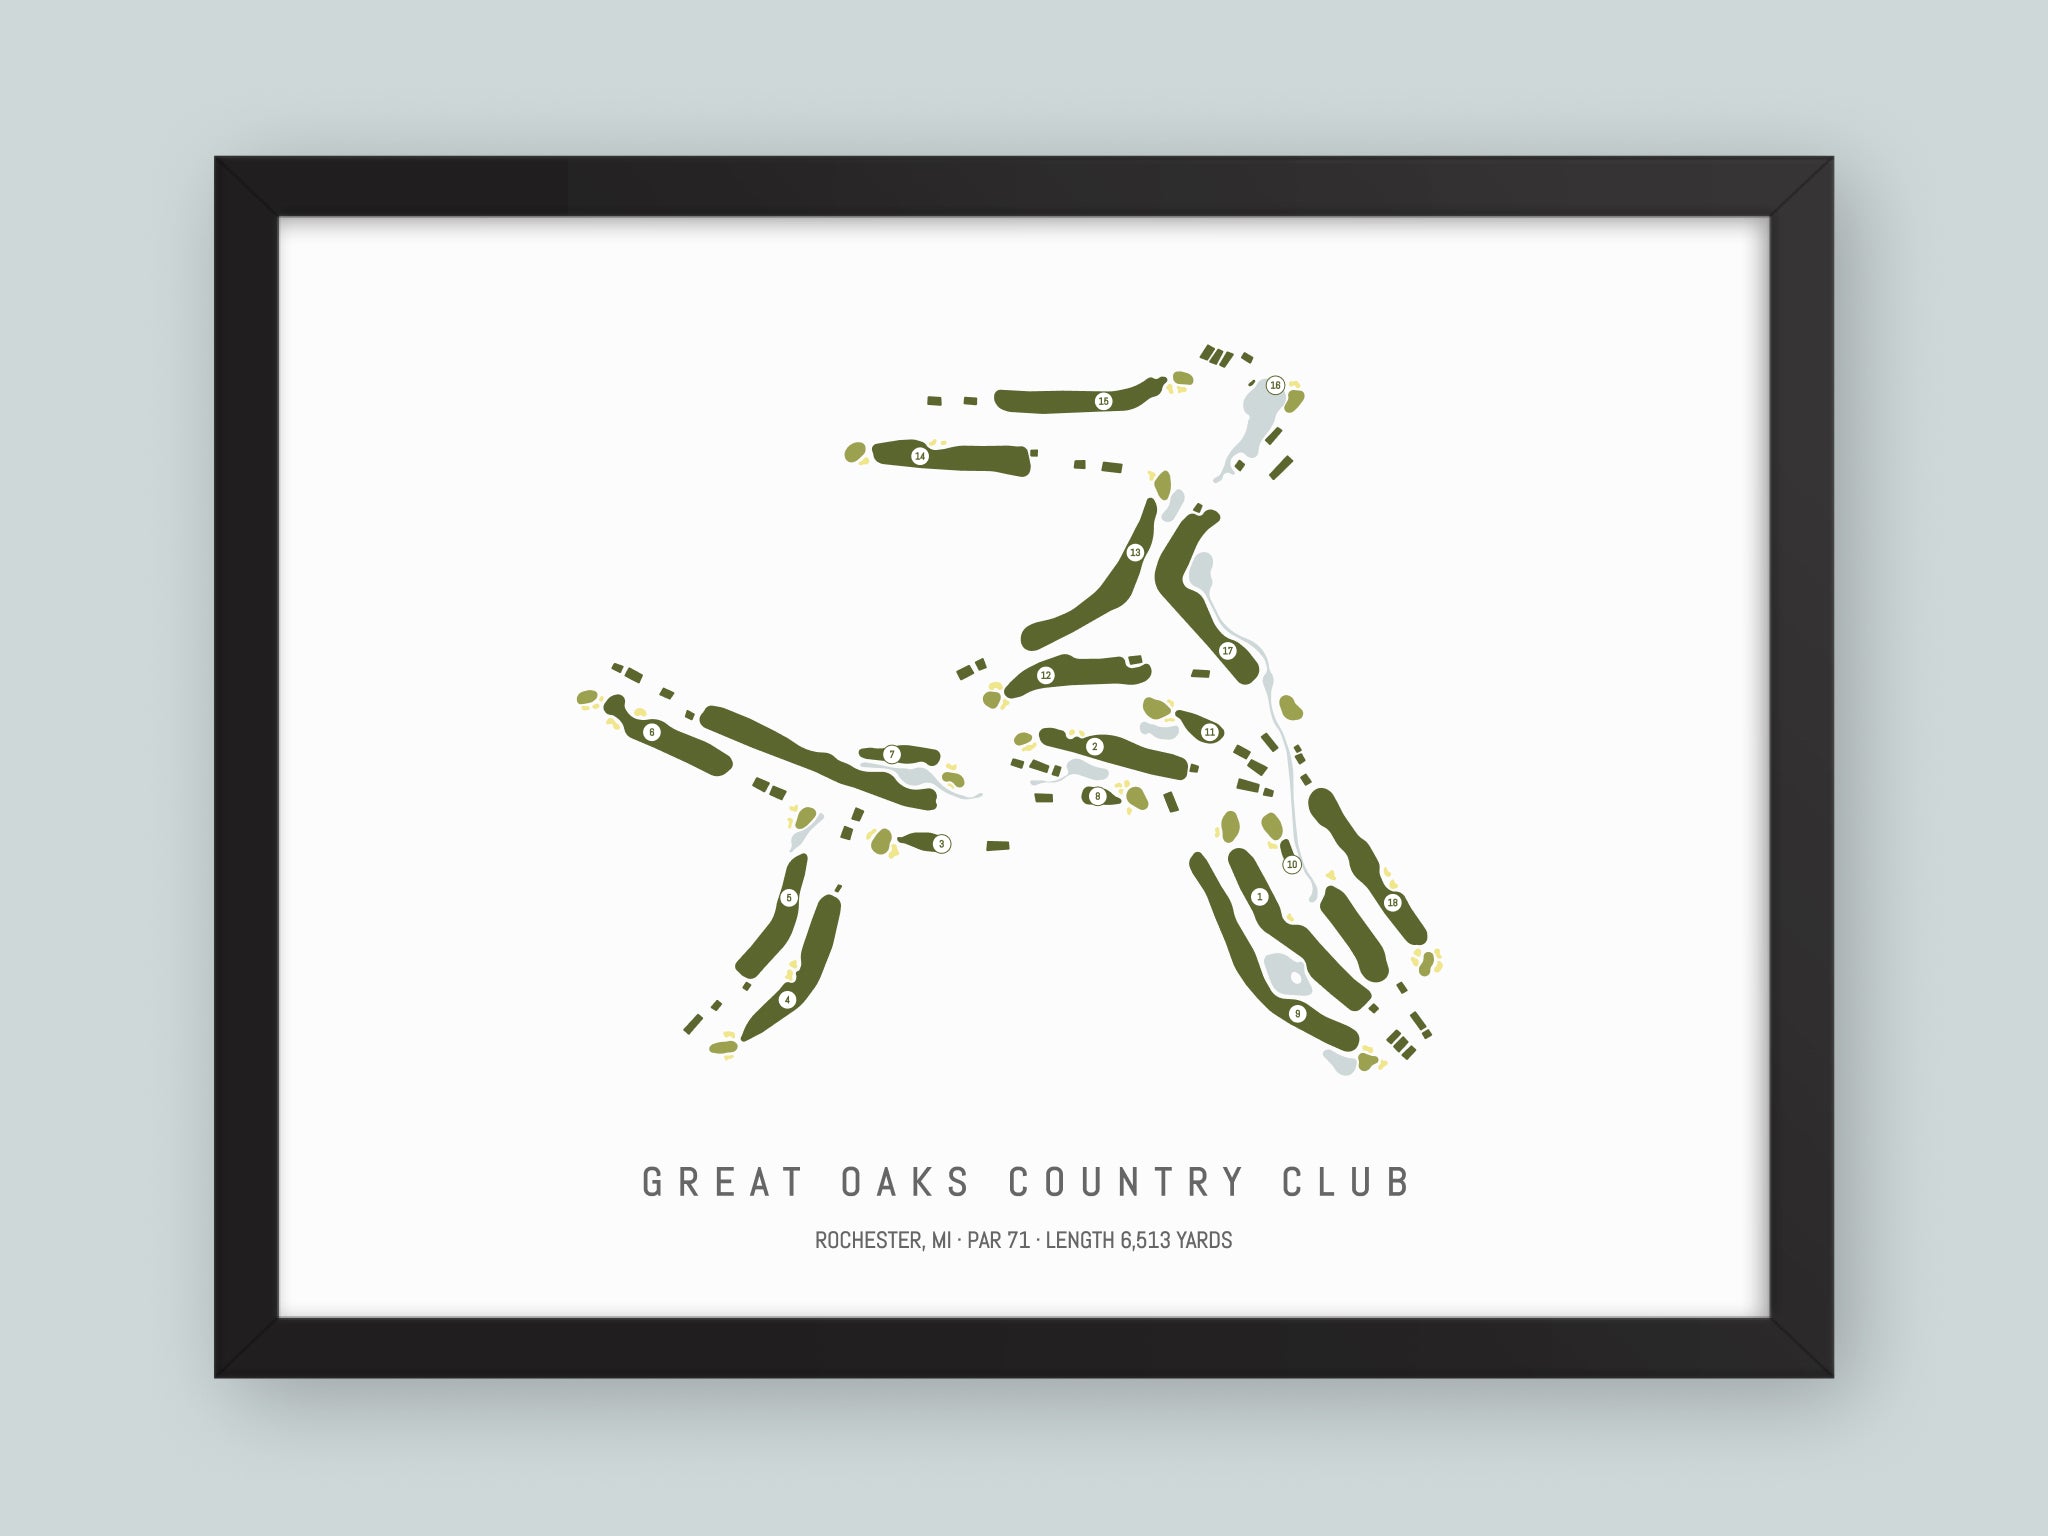 Great-Oaks-Country-Club-MI--Black-Frame-24x18-With-Hole-Numbers